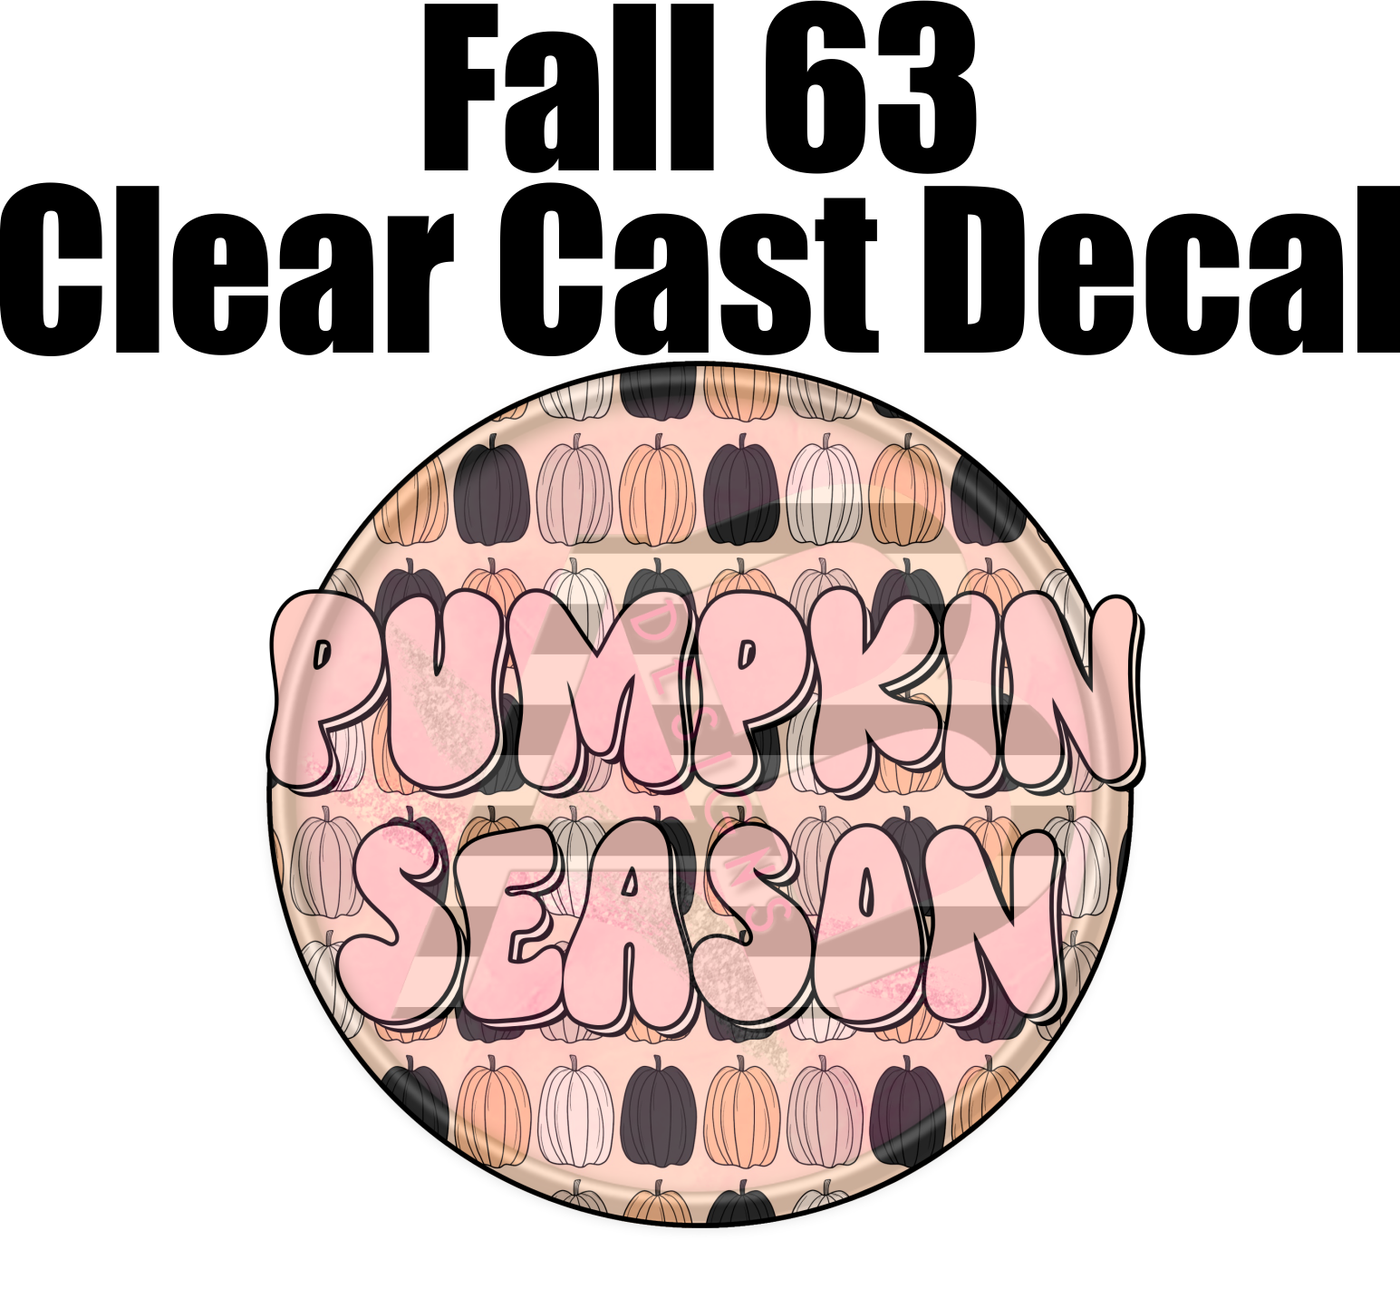 Fall 63 - Clear Cast Decal